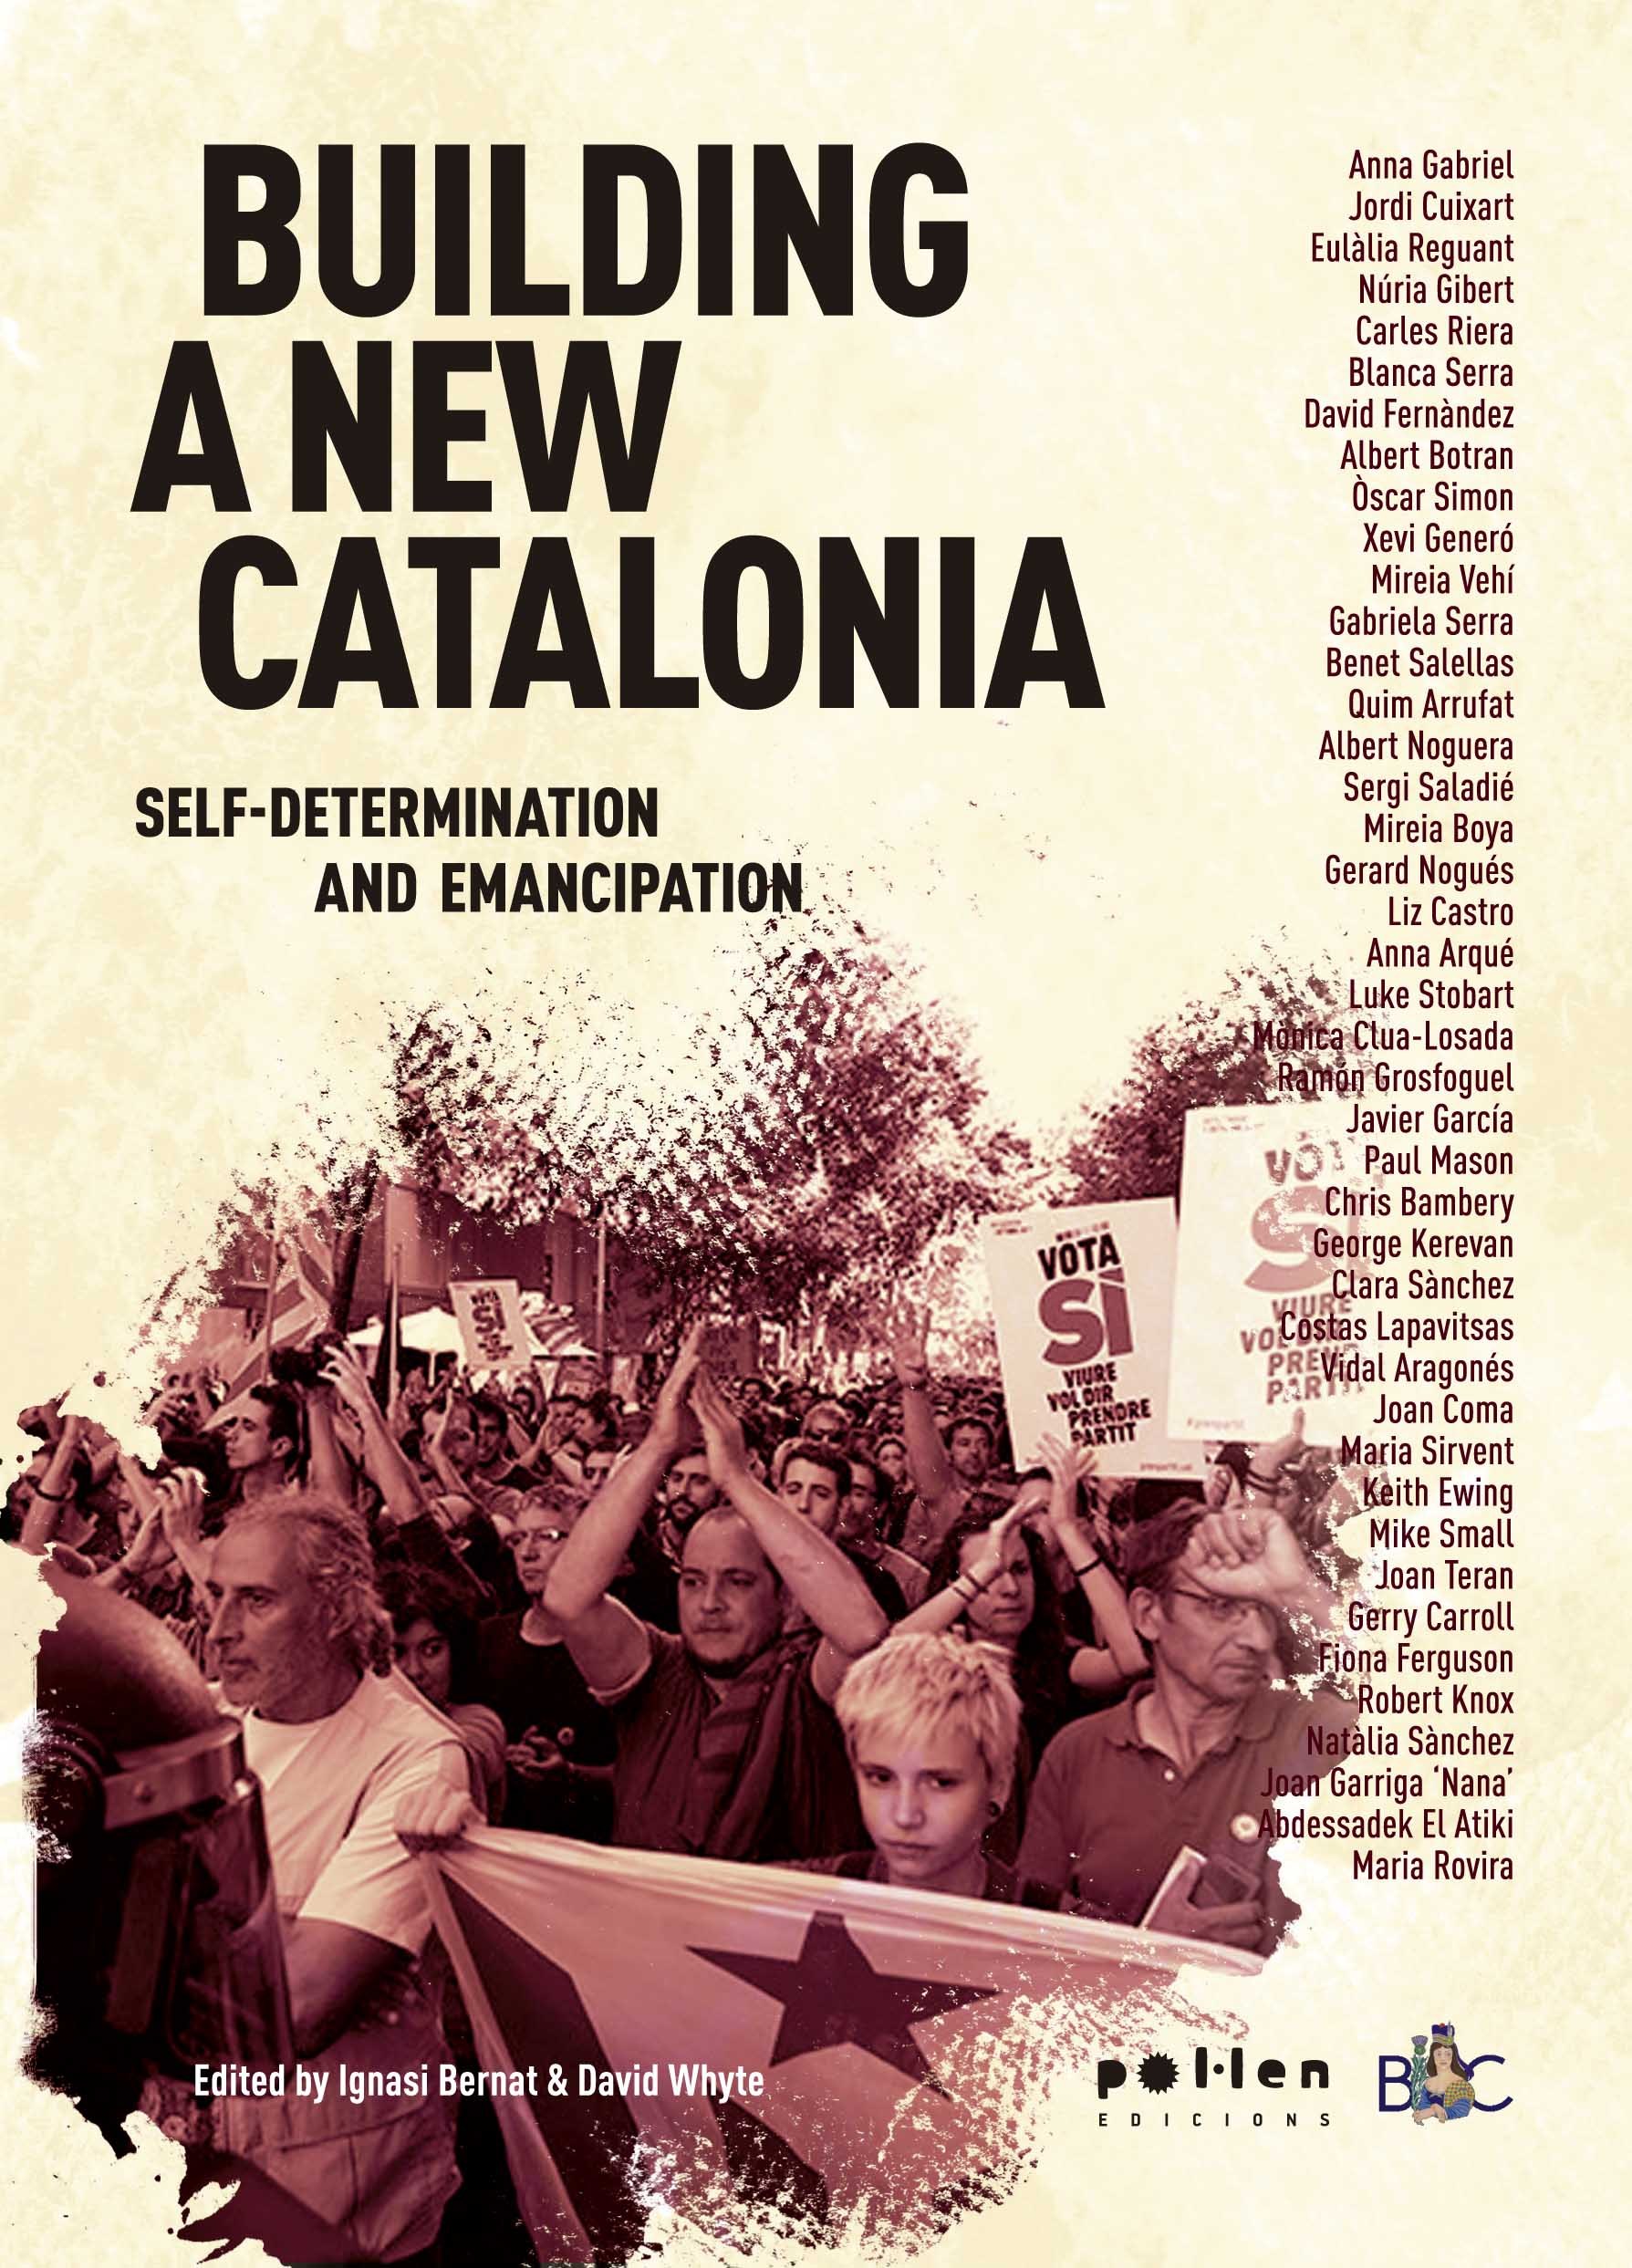 Building a new Catalonia